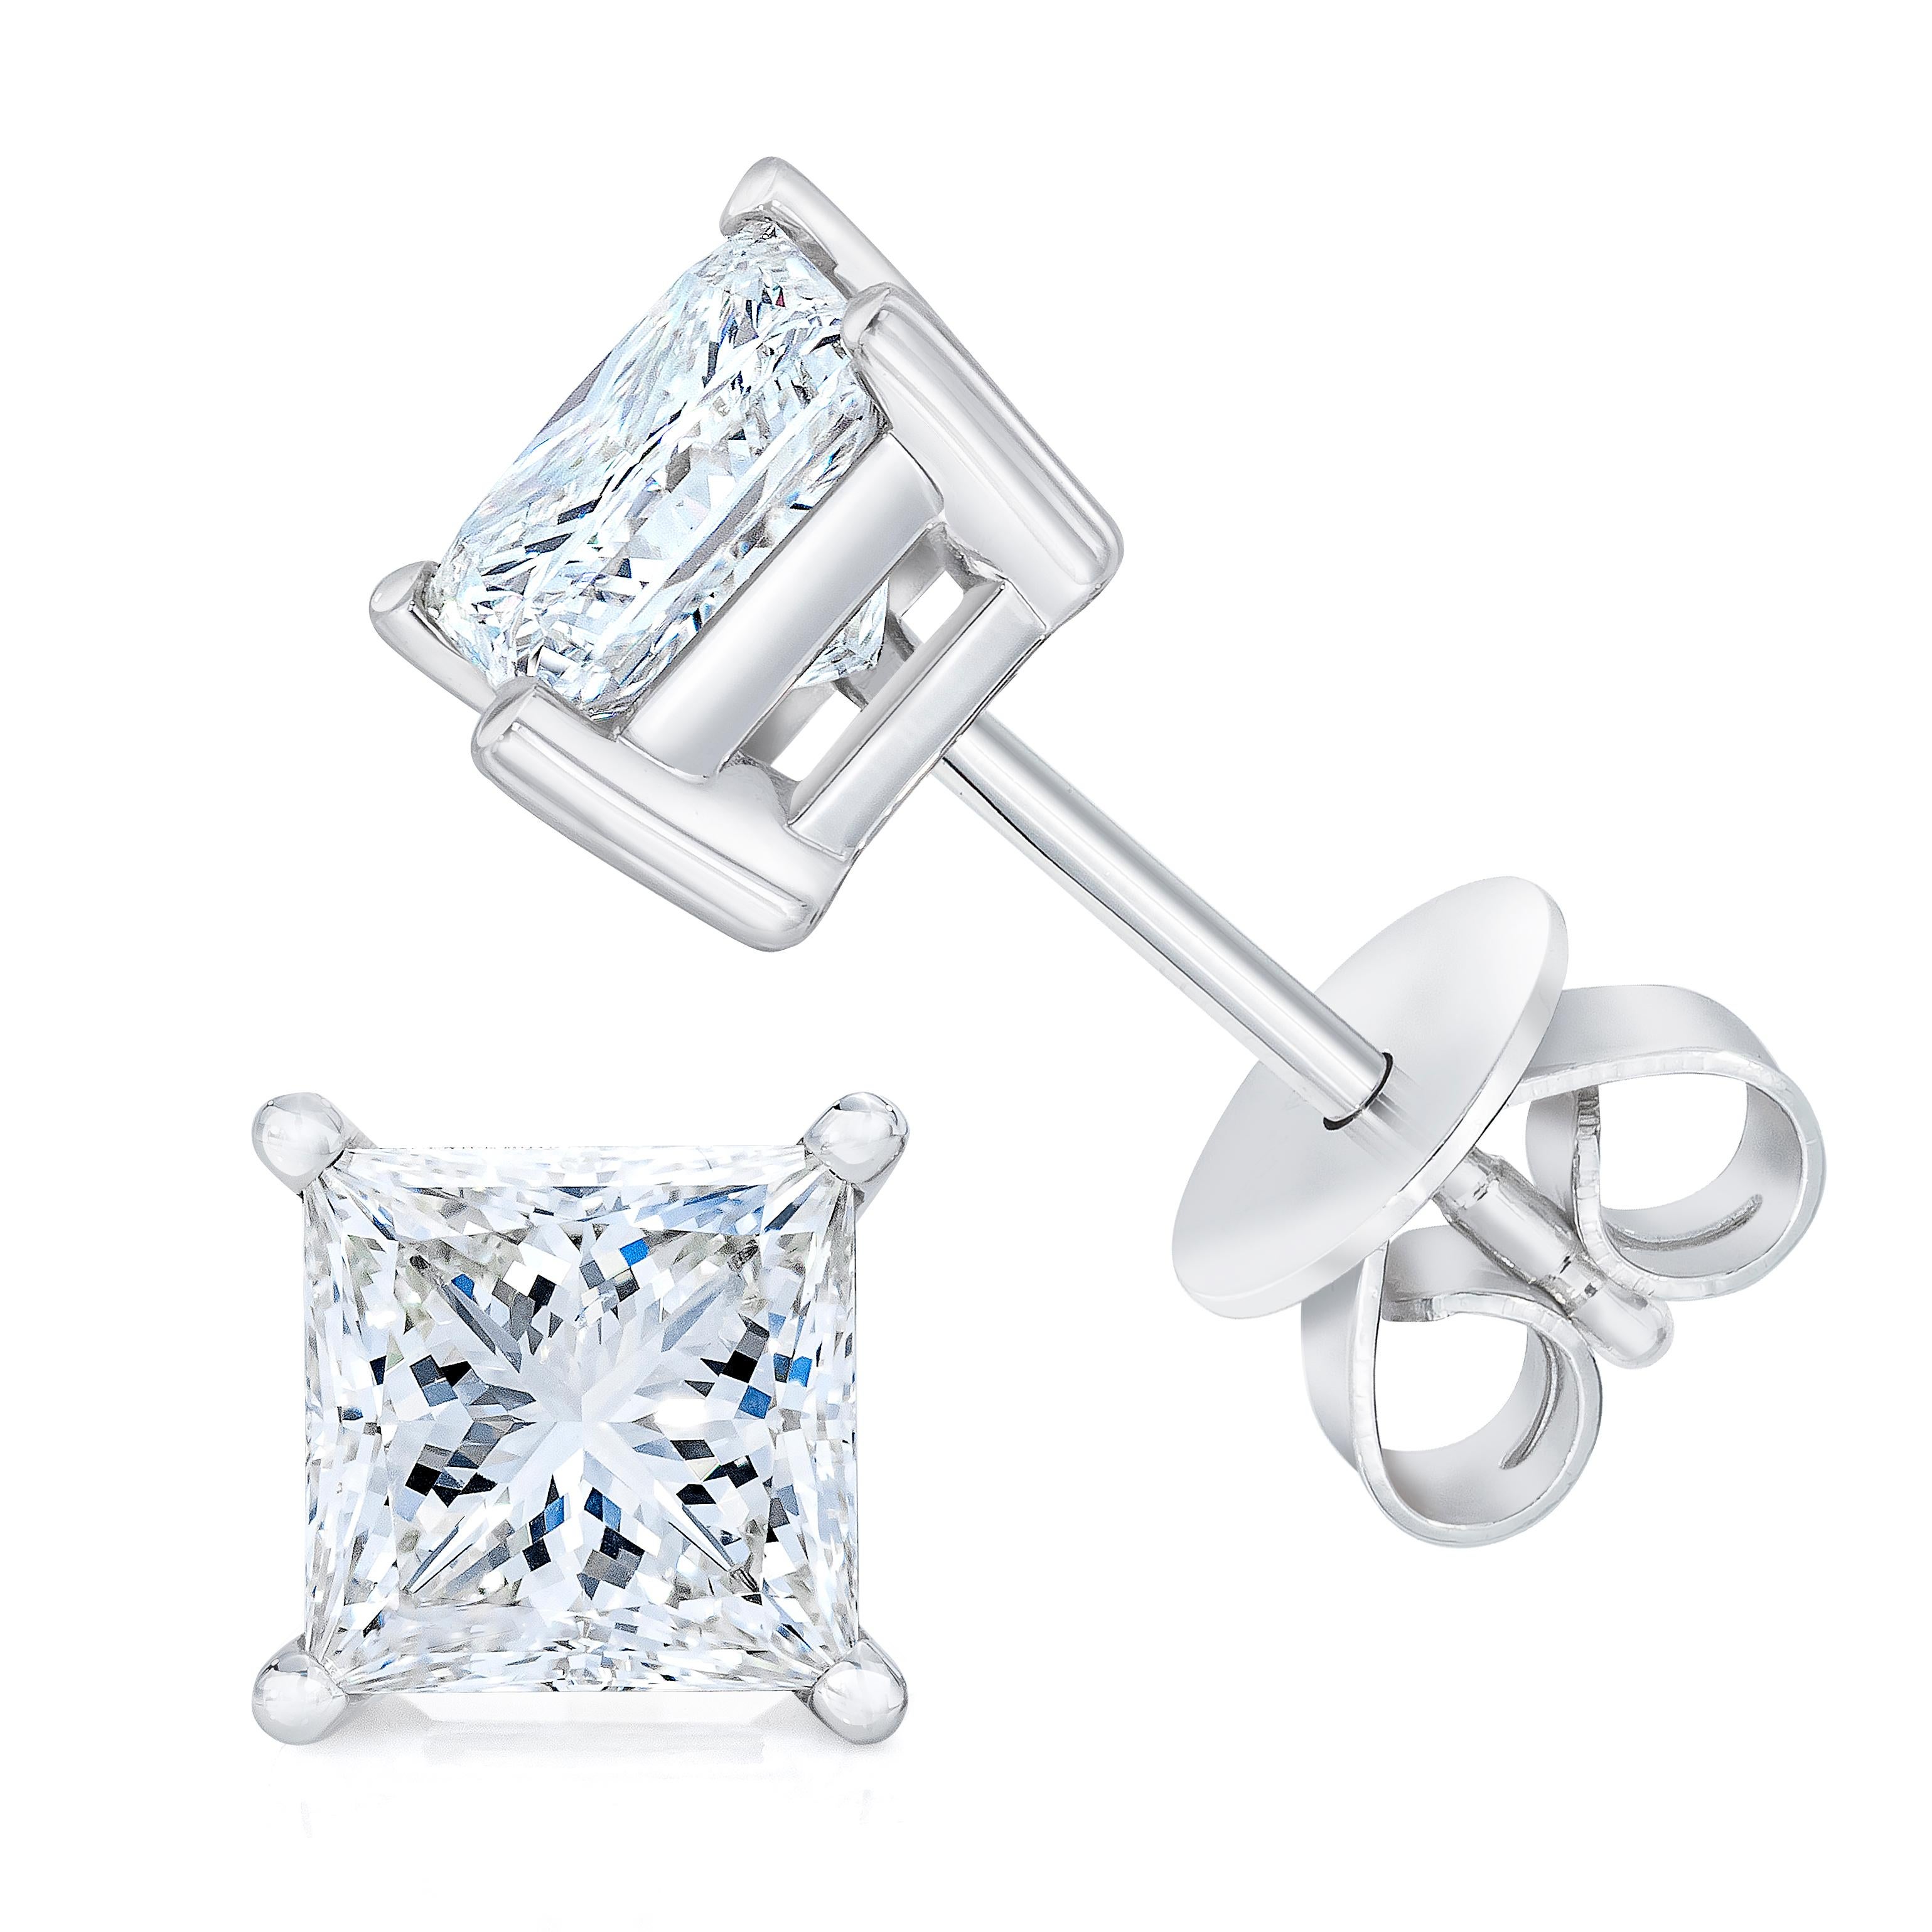 Celebrate any occasion with these classic shimmering diamond stud earrings. Crafted from 14k White Gold each earring showcases a sparkling Princess-Cut Solitaire Diamond in a 4-Prong Setting. Dazzling with 3/8 cttw of diamonds and a bright polished